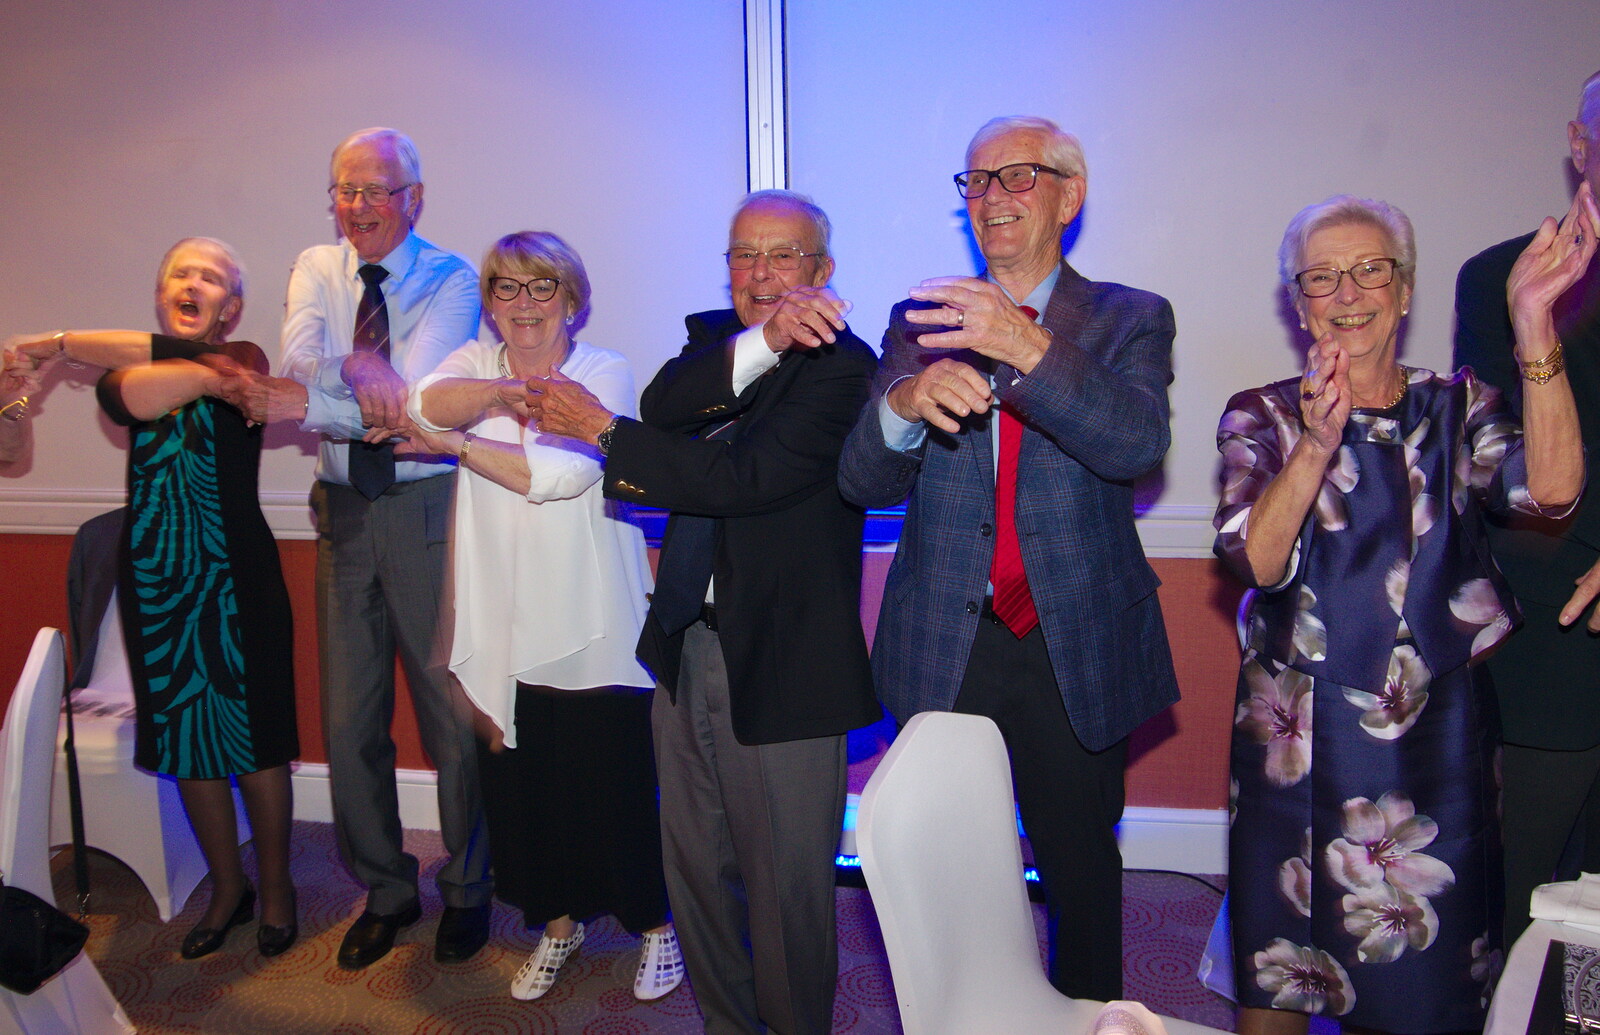 Linked arms break up into clapping from Kenilworth Castle and the 69th Entry Reunion Dinner, Stratford, Warwickshire - 14th September 2019